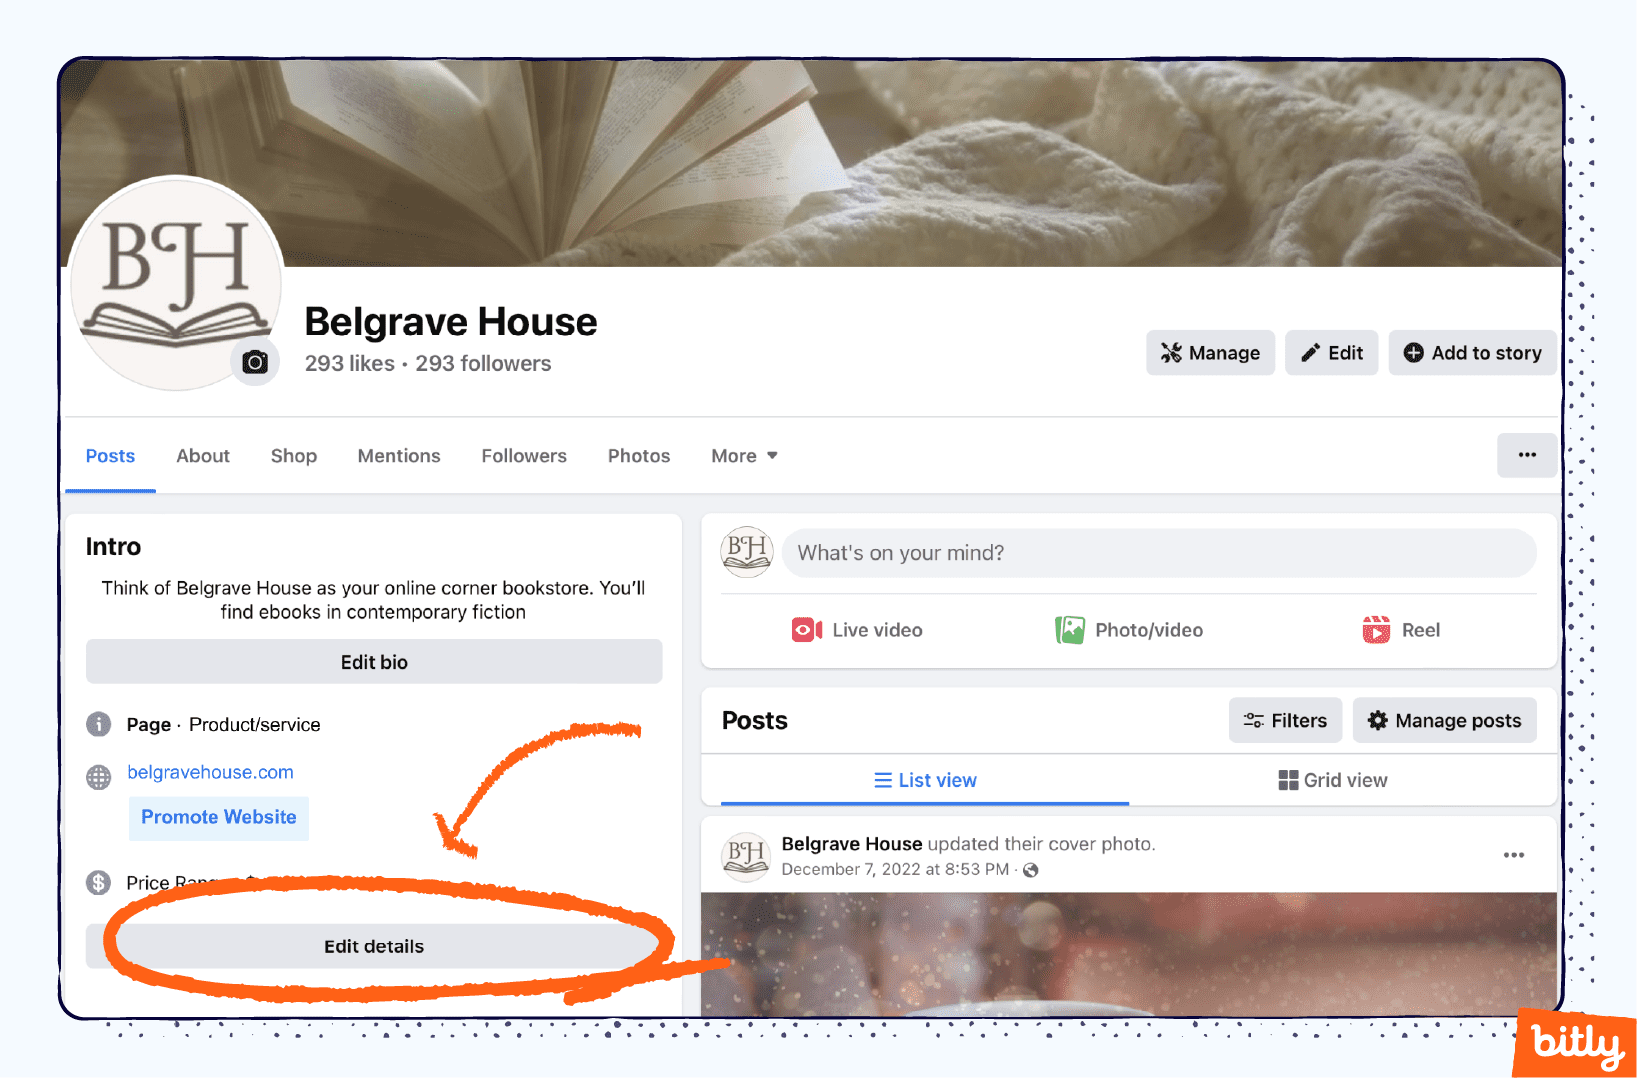 An orange arrow pointing to an Edit details button on the desktop version of Facebook.